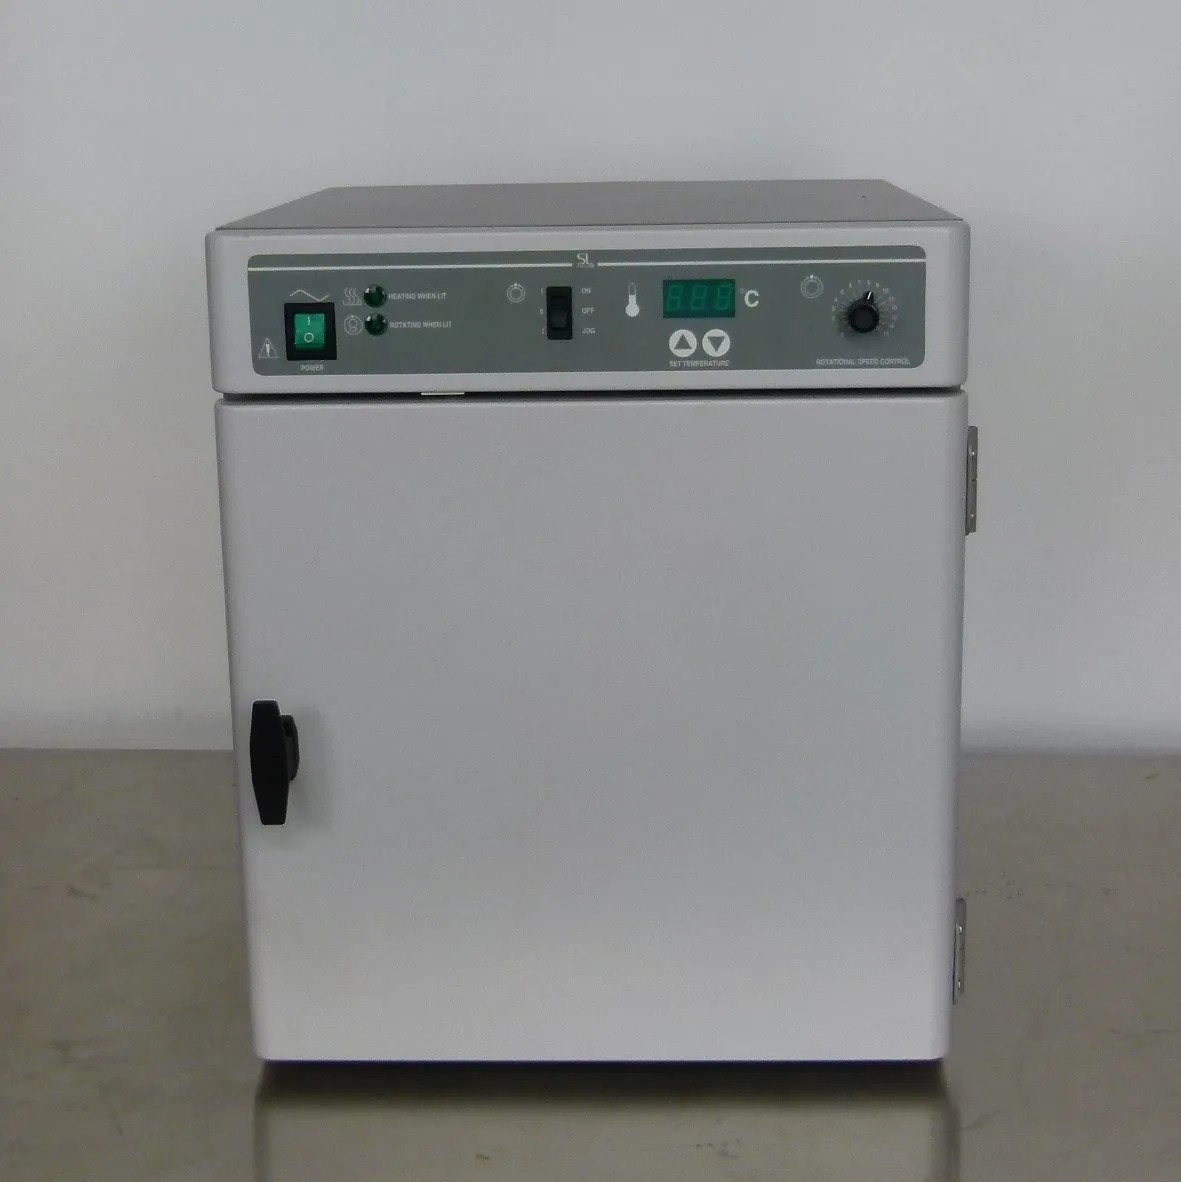 Shel Labs VWR Model 1012AG Incubator/Hybridization Oven with Carousel